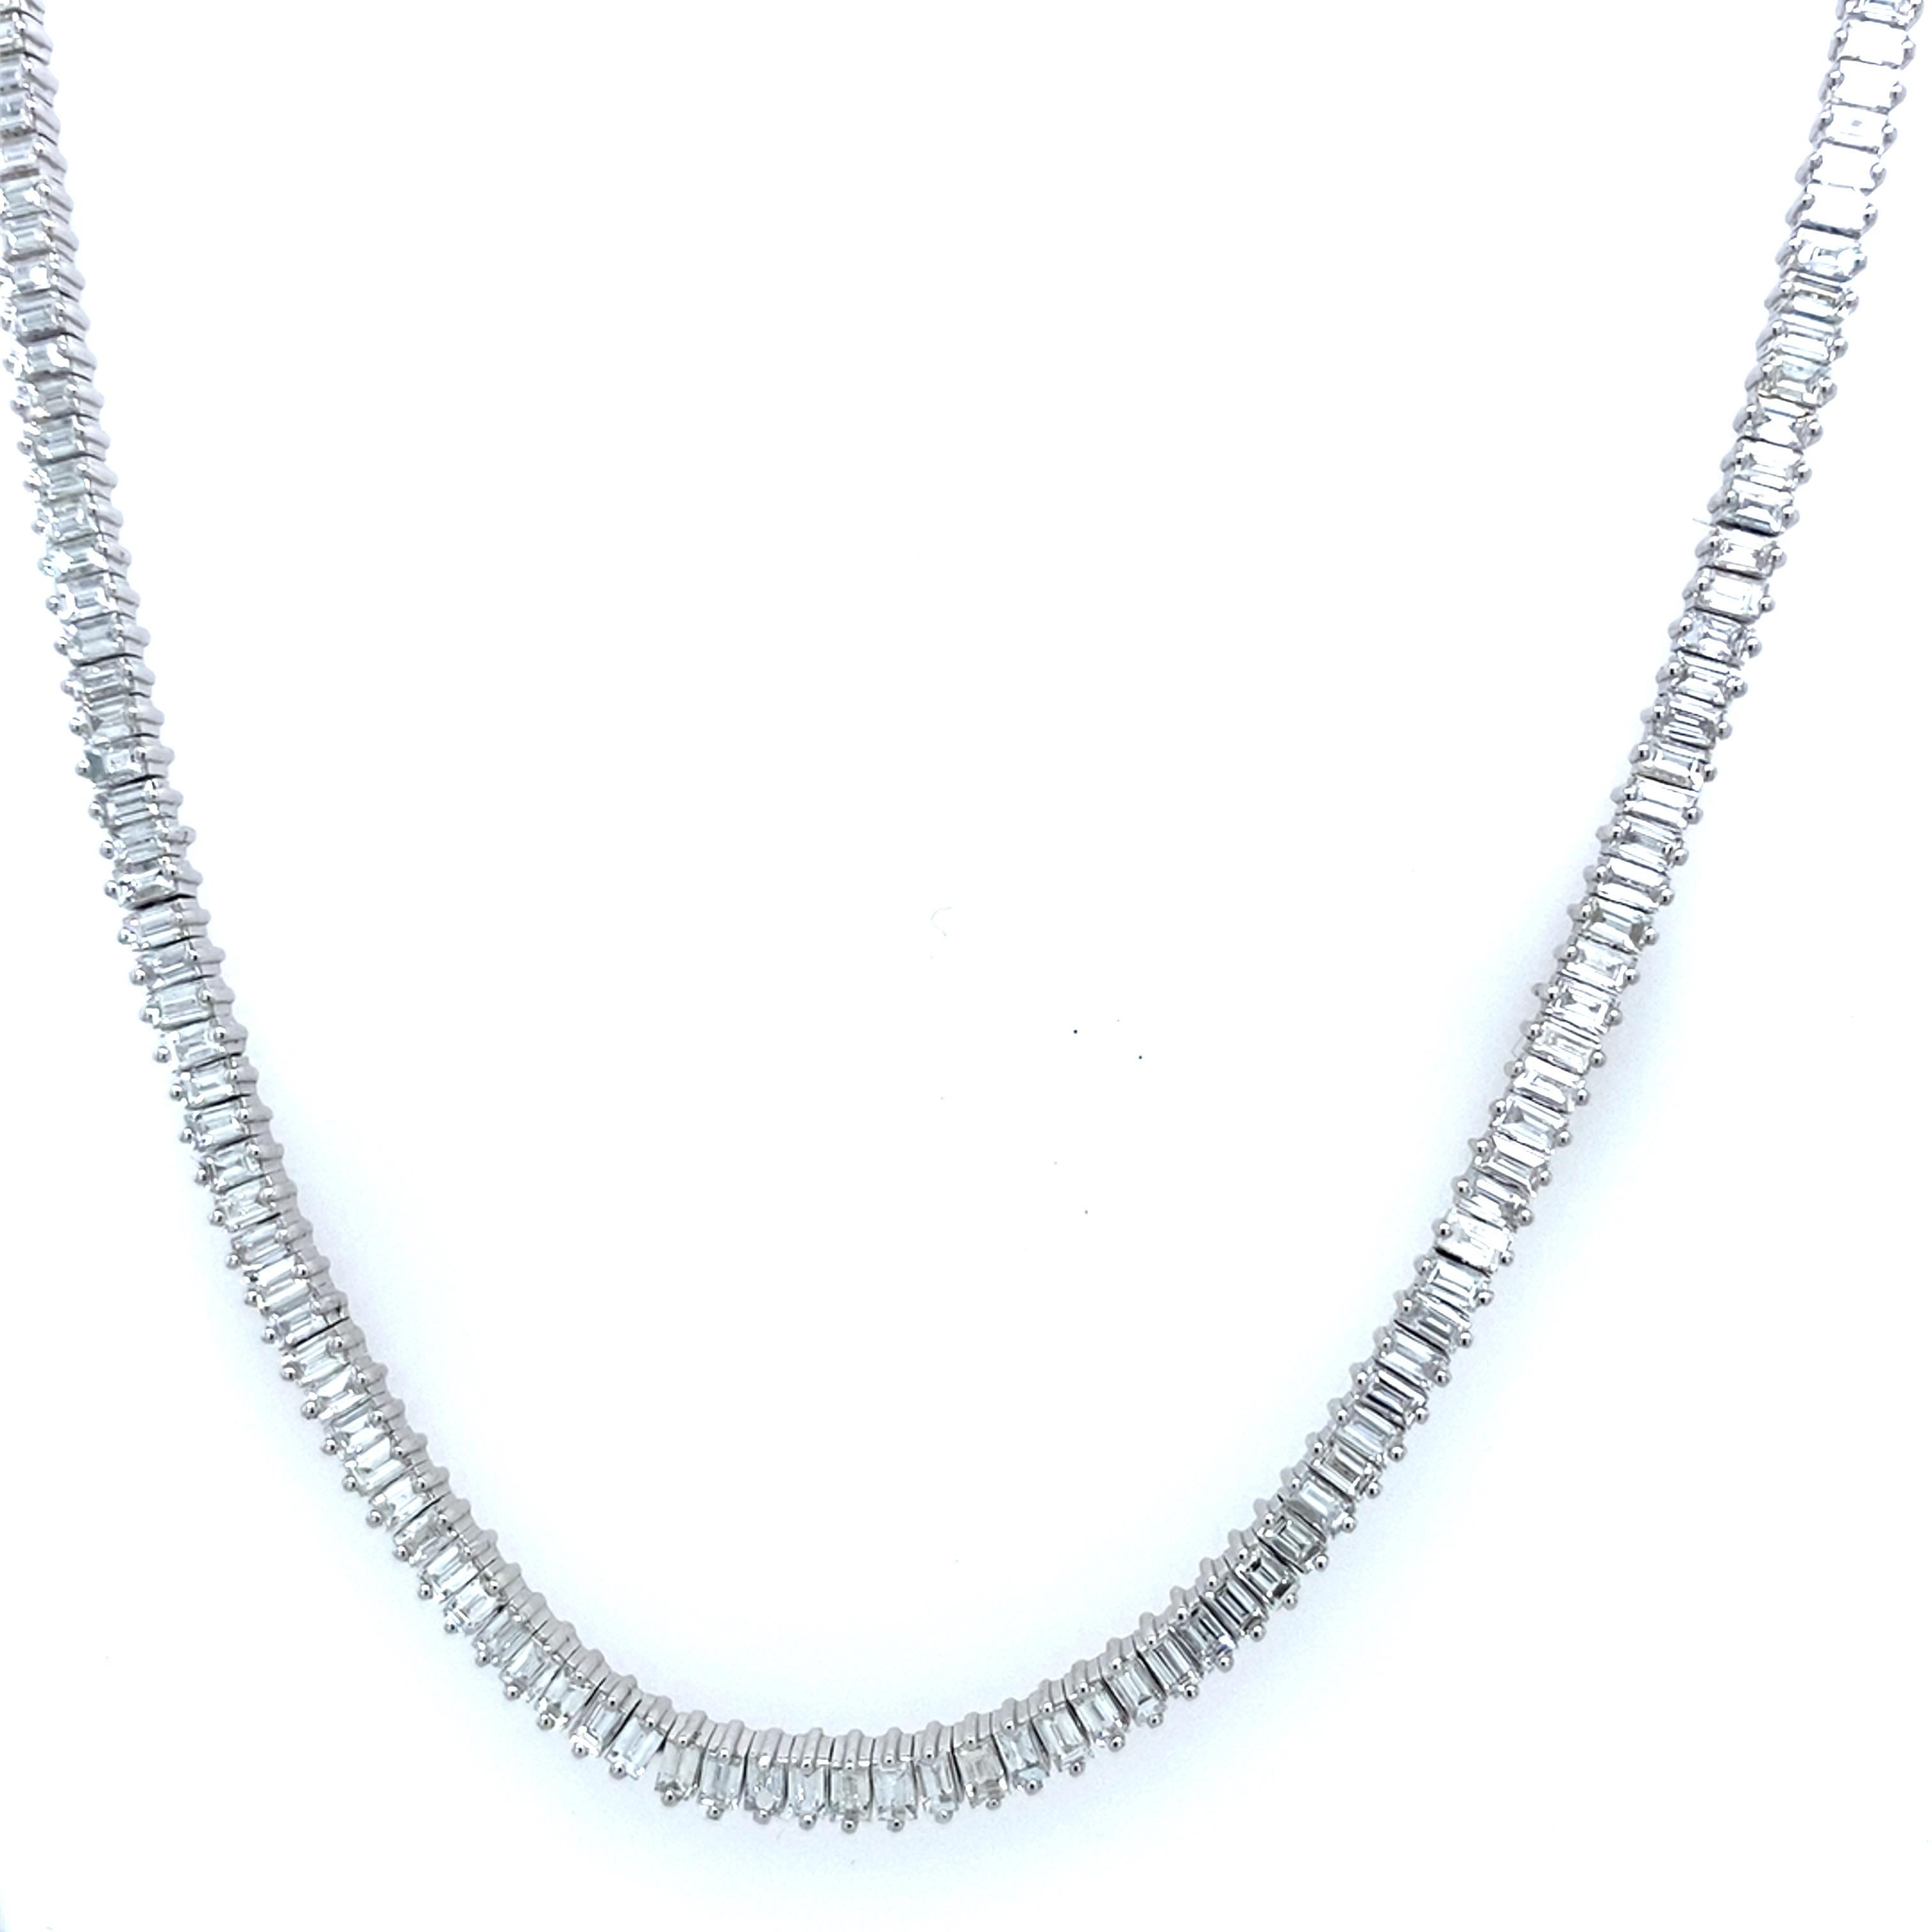 It is crafted in 18 carat white gold. This tennis necklace is set with 4.40 carats of baguette diamonds. It is a timeless piece that will never go out of style.

Additional Information: 
Total Diamond Weight: 4.40ct
Diamond Colour: G
Diamond